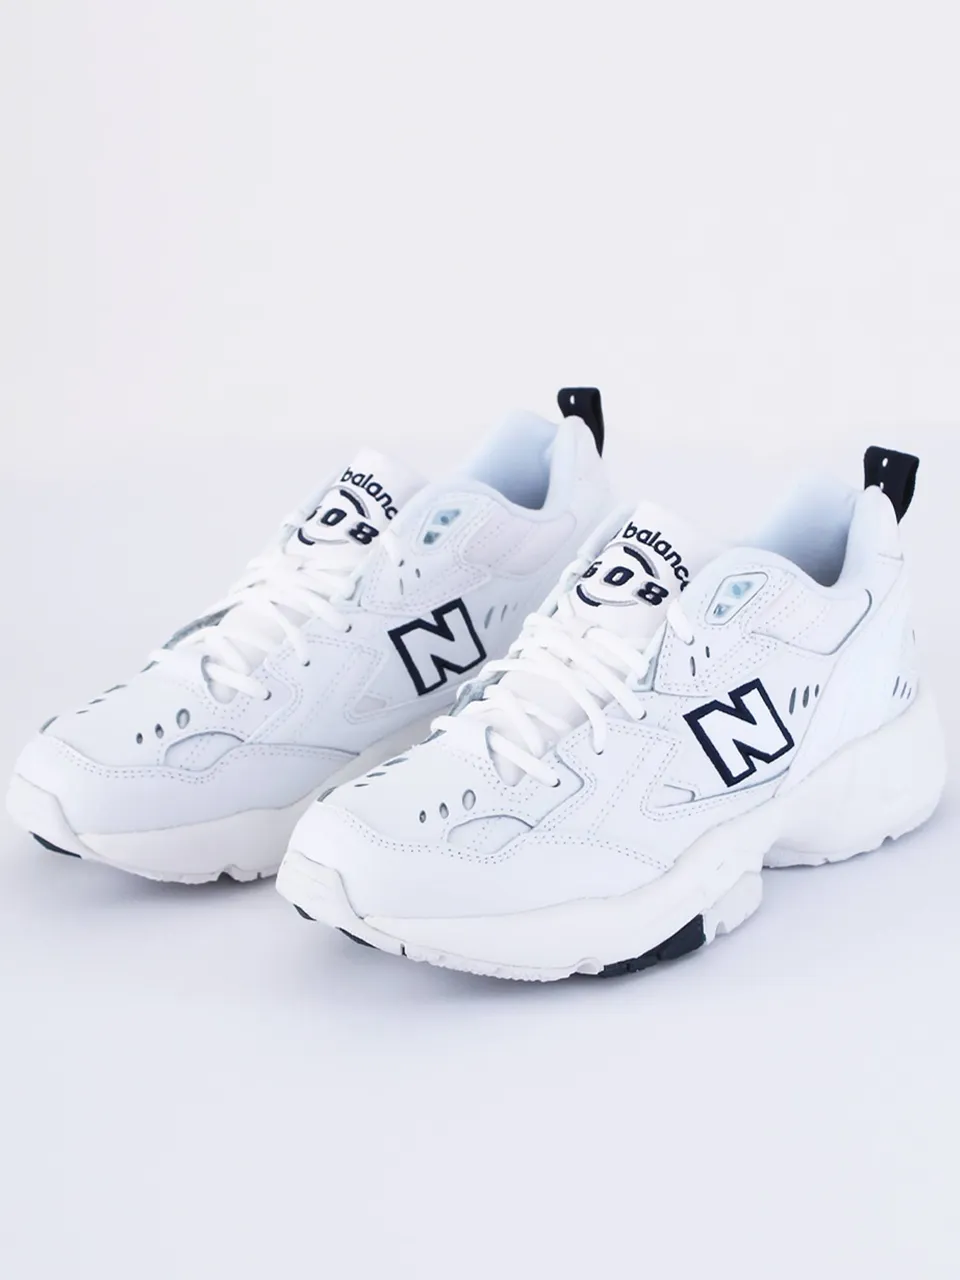 New Balance White With Navy Mx608v1 Trainers